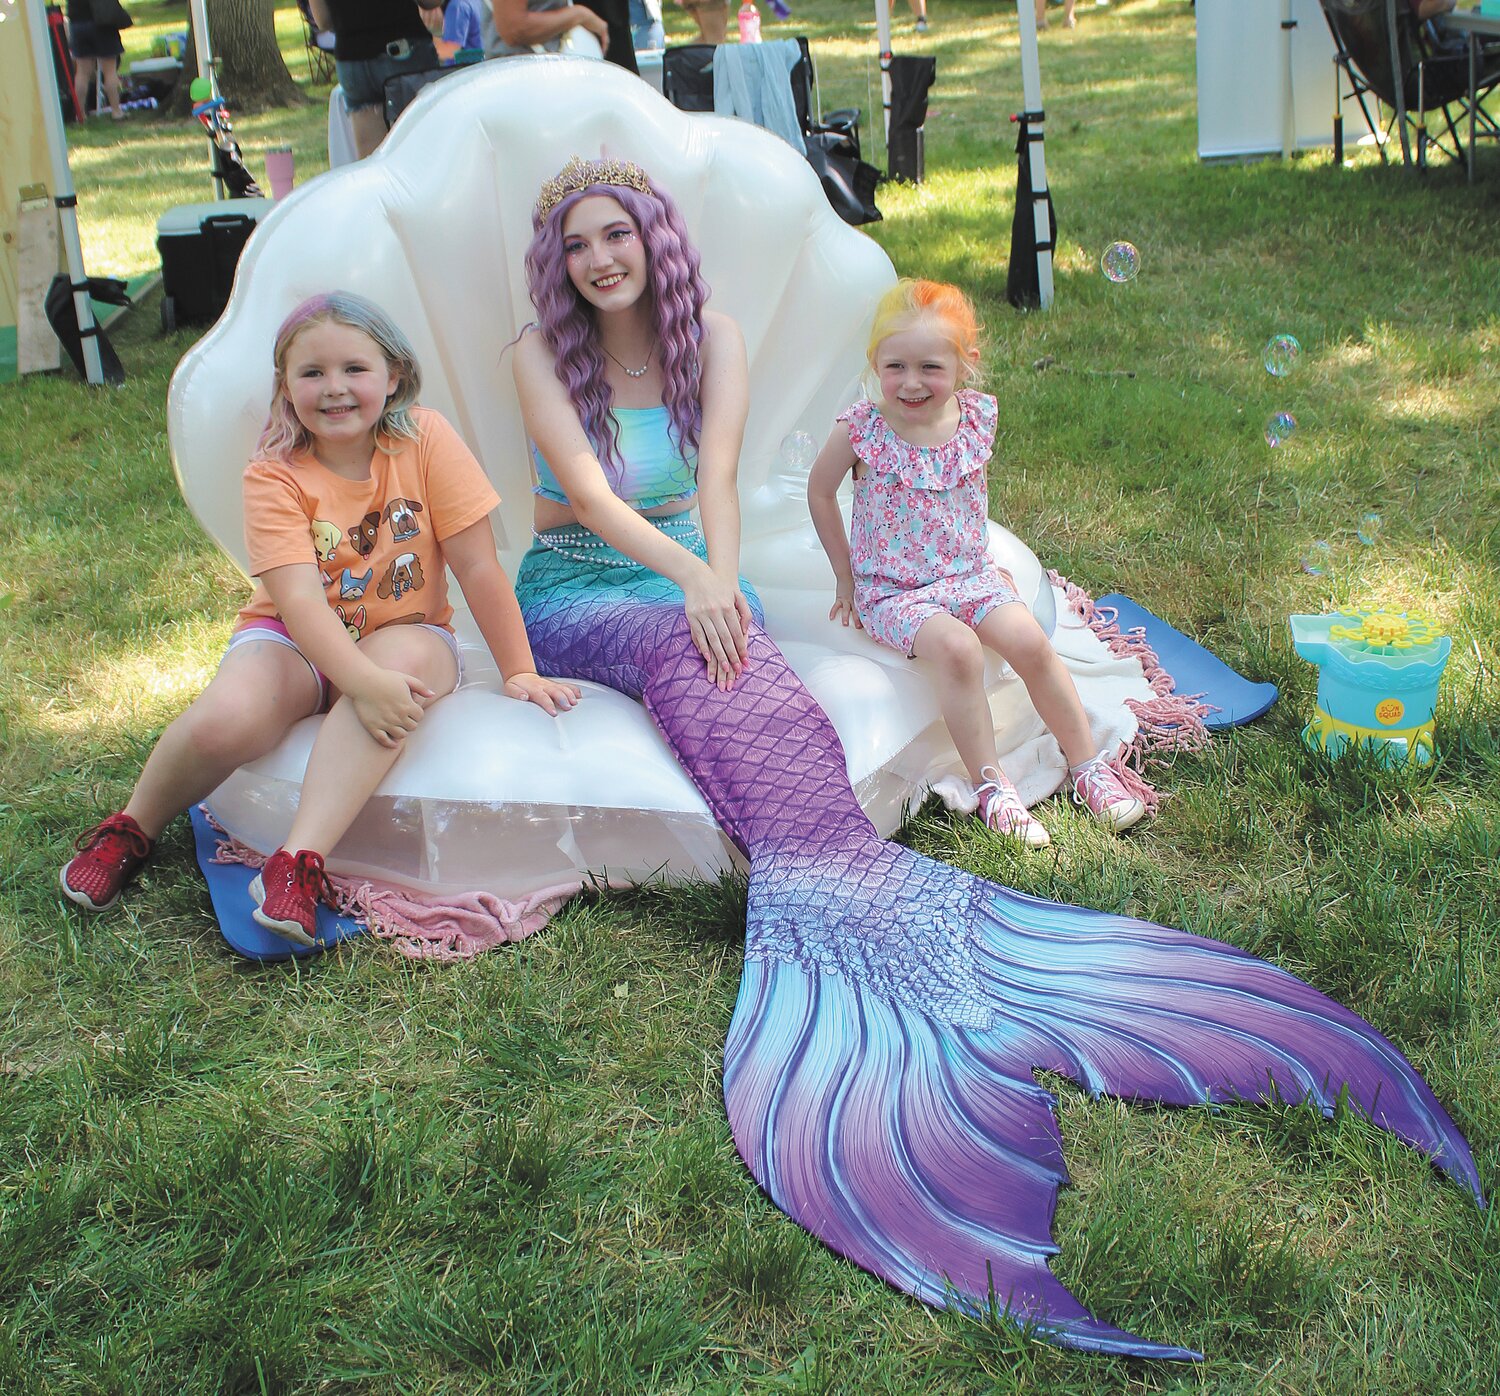 Sawyer Ranspach, 7, left, and Parker Ranspach, 4, pose with a mermaid in the Children's Area.